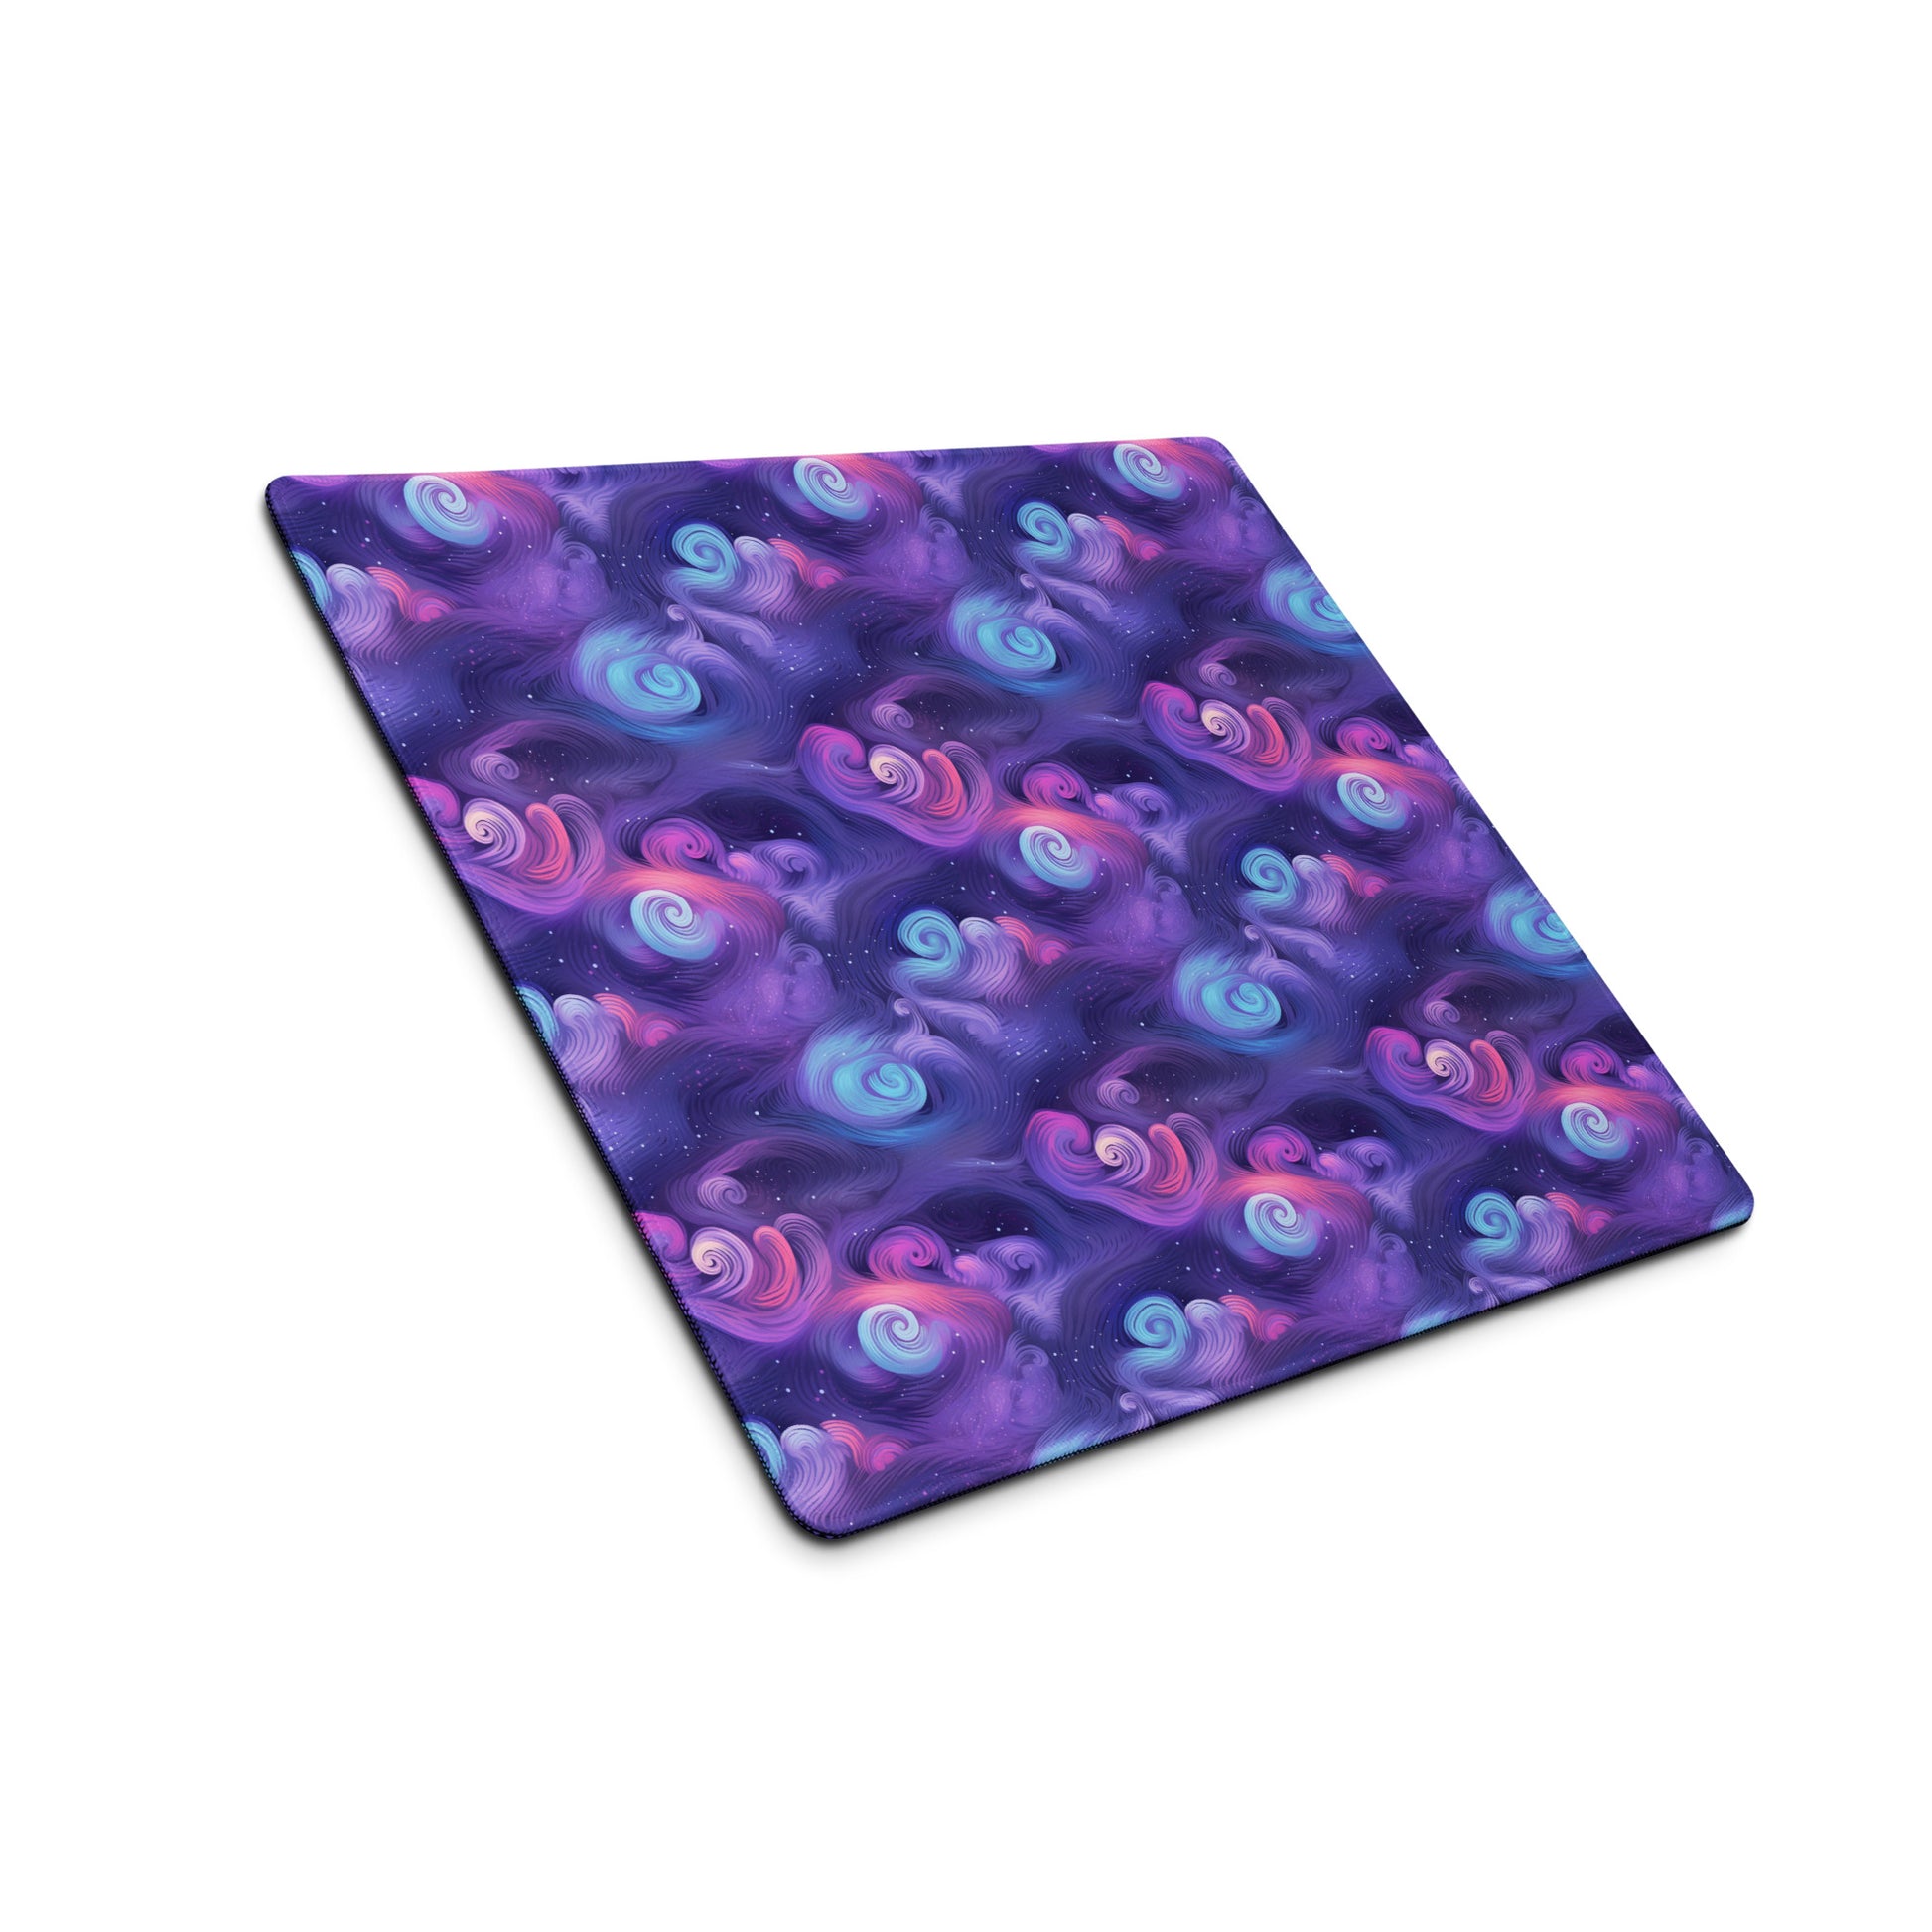 A 18" x 16" desk pad with fluffy clouds and stars on it shown at an angle. Blue and Purple in color